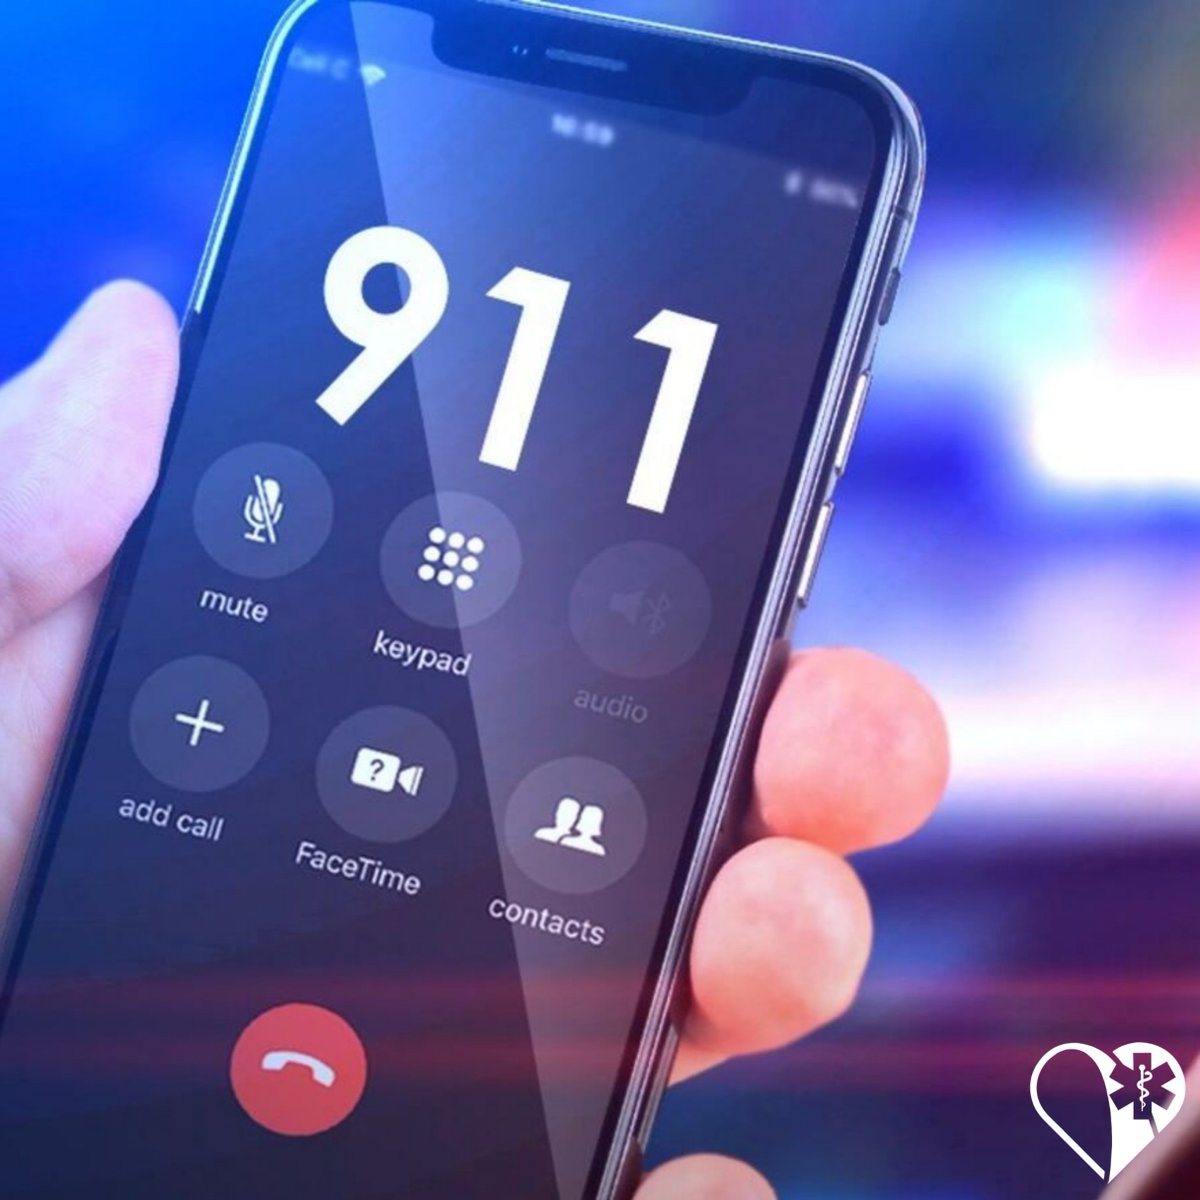 There is a reported nearly NATIONWIDE outage for AT&T, as well as some Verizon & T-Mobile customers. Your ability to contact 911 may be affected if you have service with one of these carriers. (1/2)